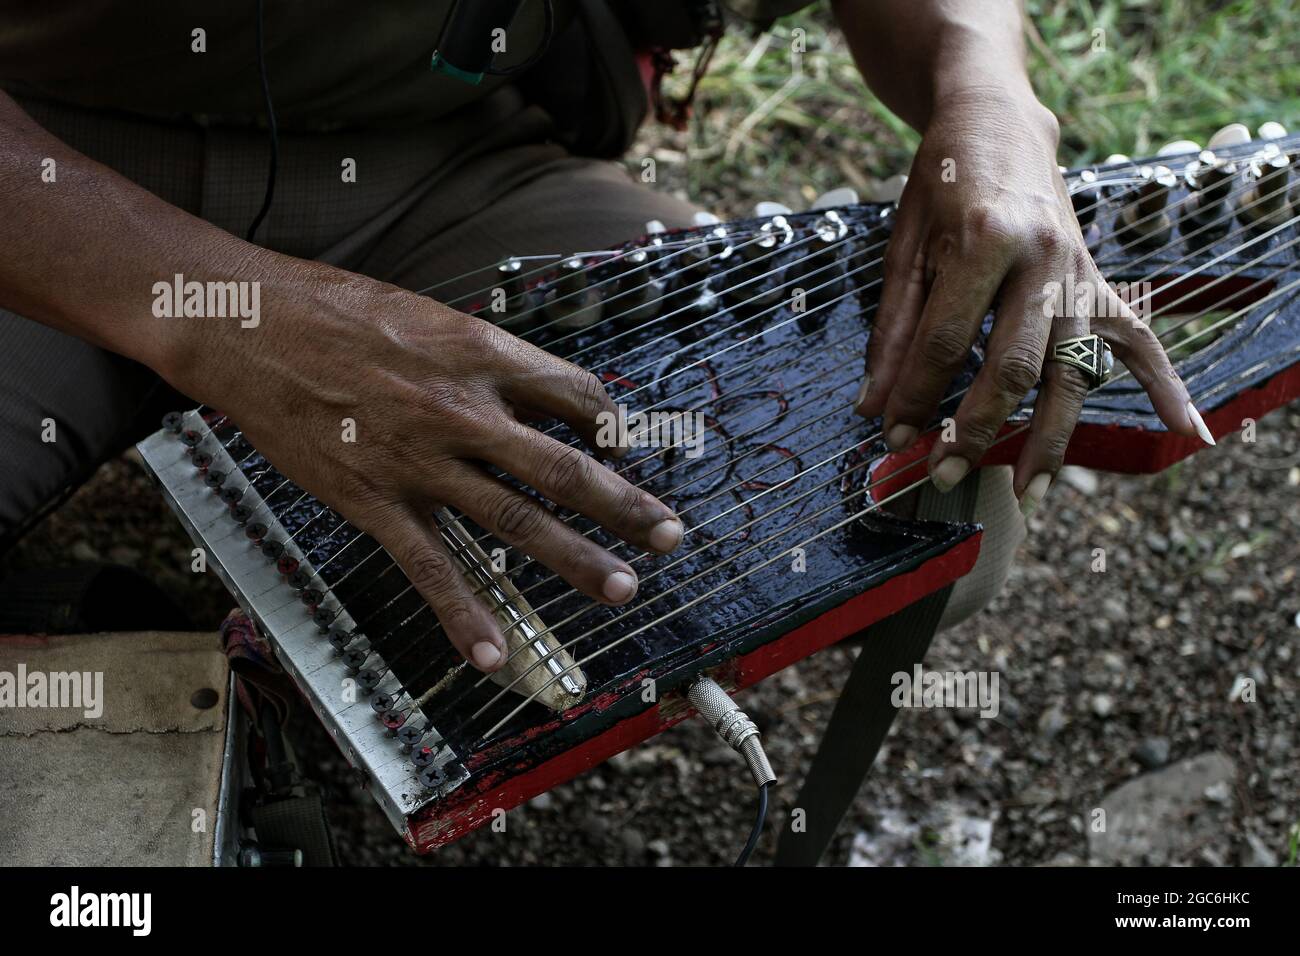 Bandung, West Java, Indonesia. Plays the Kacapi musical instrument which is a Sundanese art musical instrument. Stock Photo